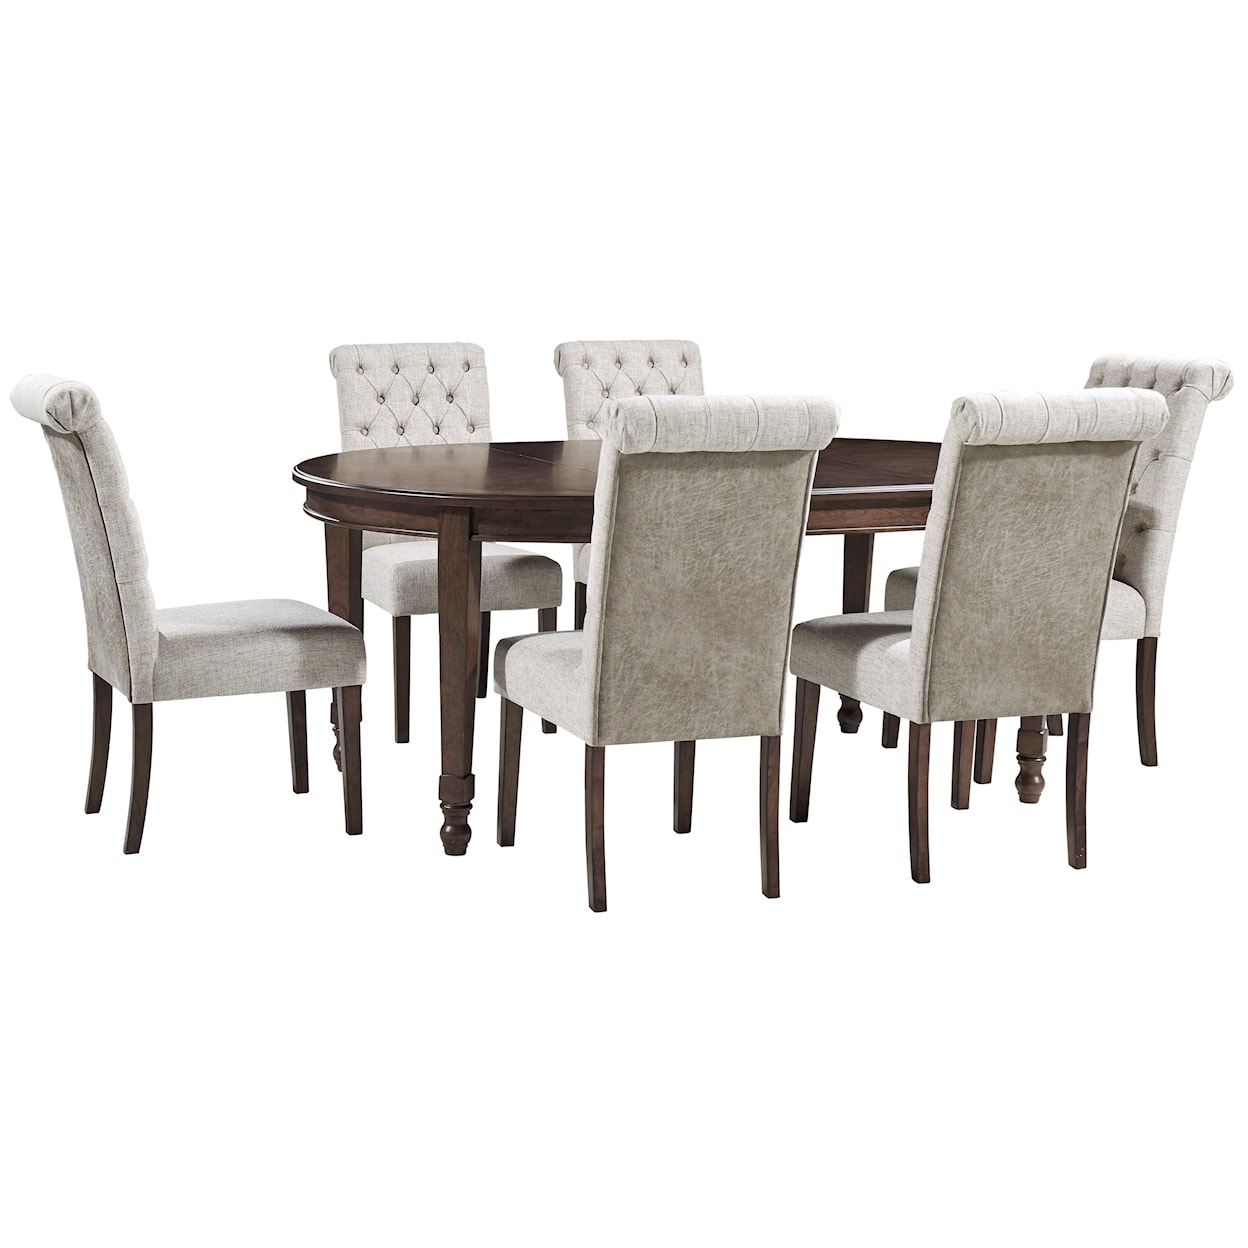 Signature Design by Ashley Adinton 7-Piece Table and Chair Set